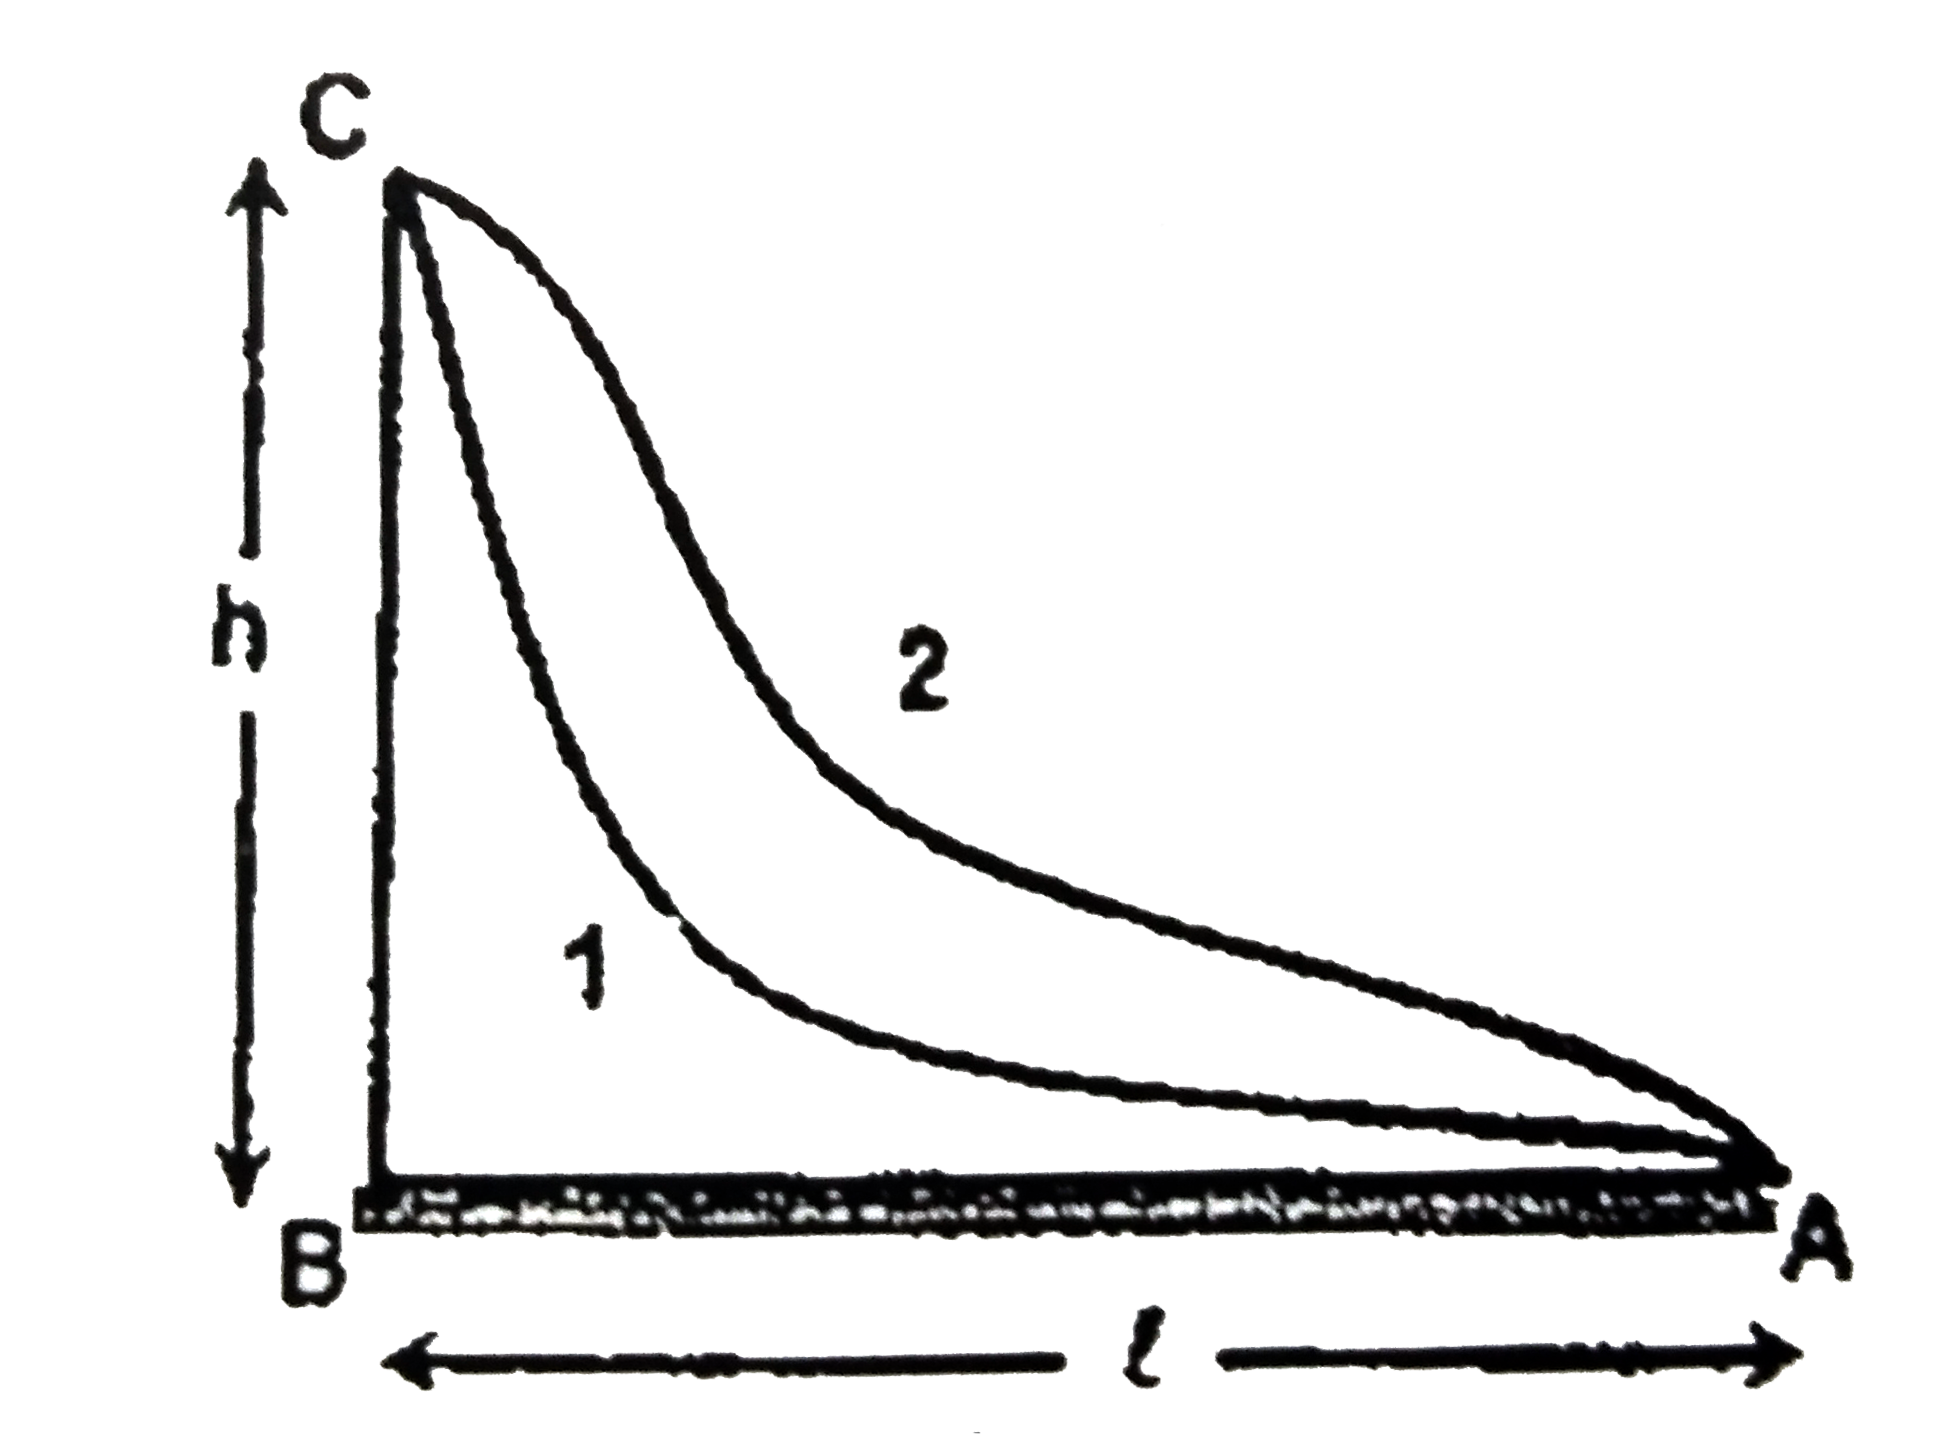 A body is filled quasi statically to the top of a mountain through path 1 and path 2 by applying a force from bottom in the figure. Coefficient of friction between the body and surface is mu then